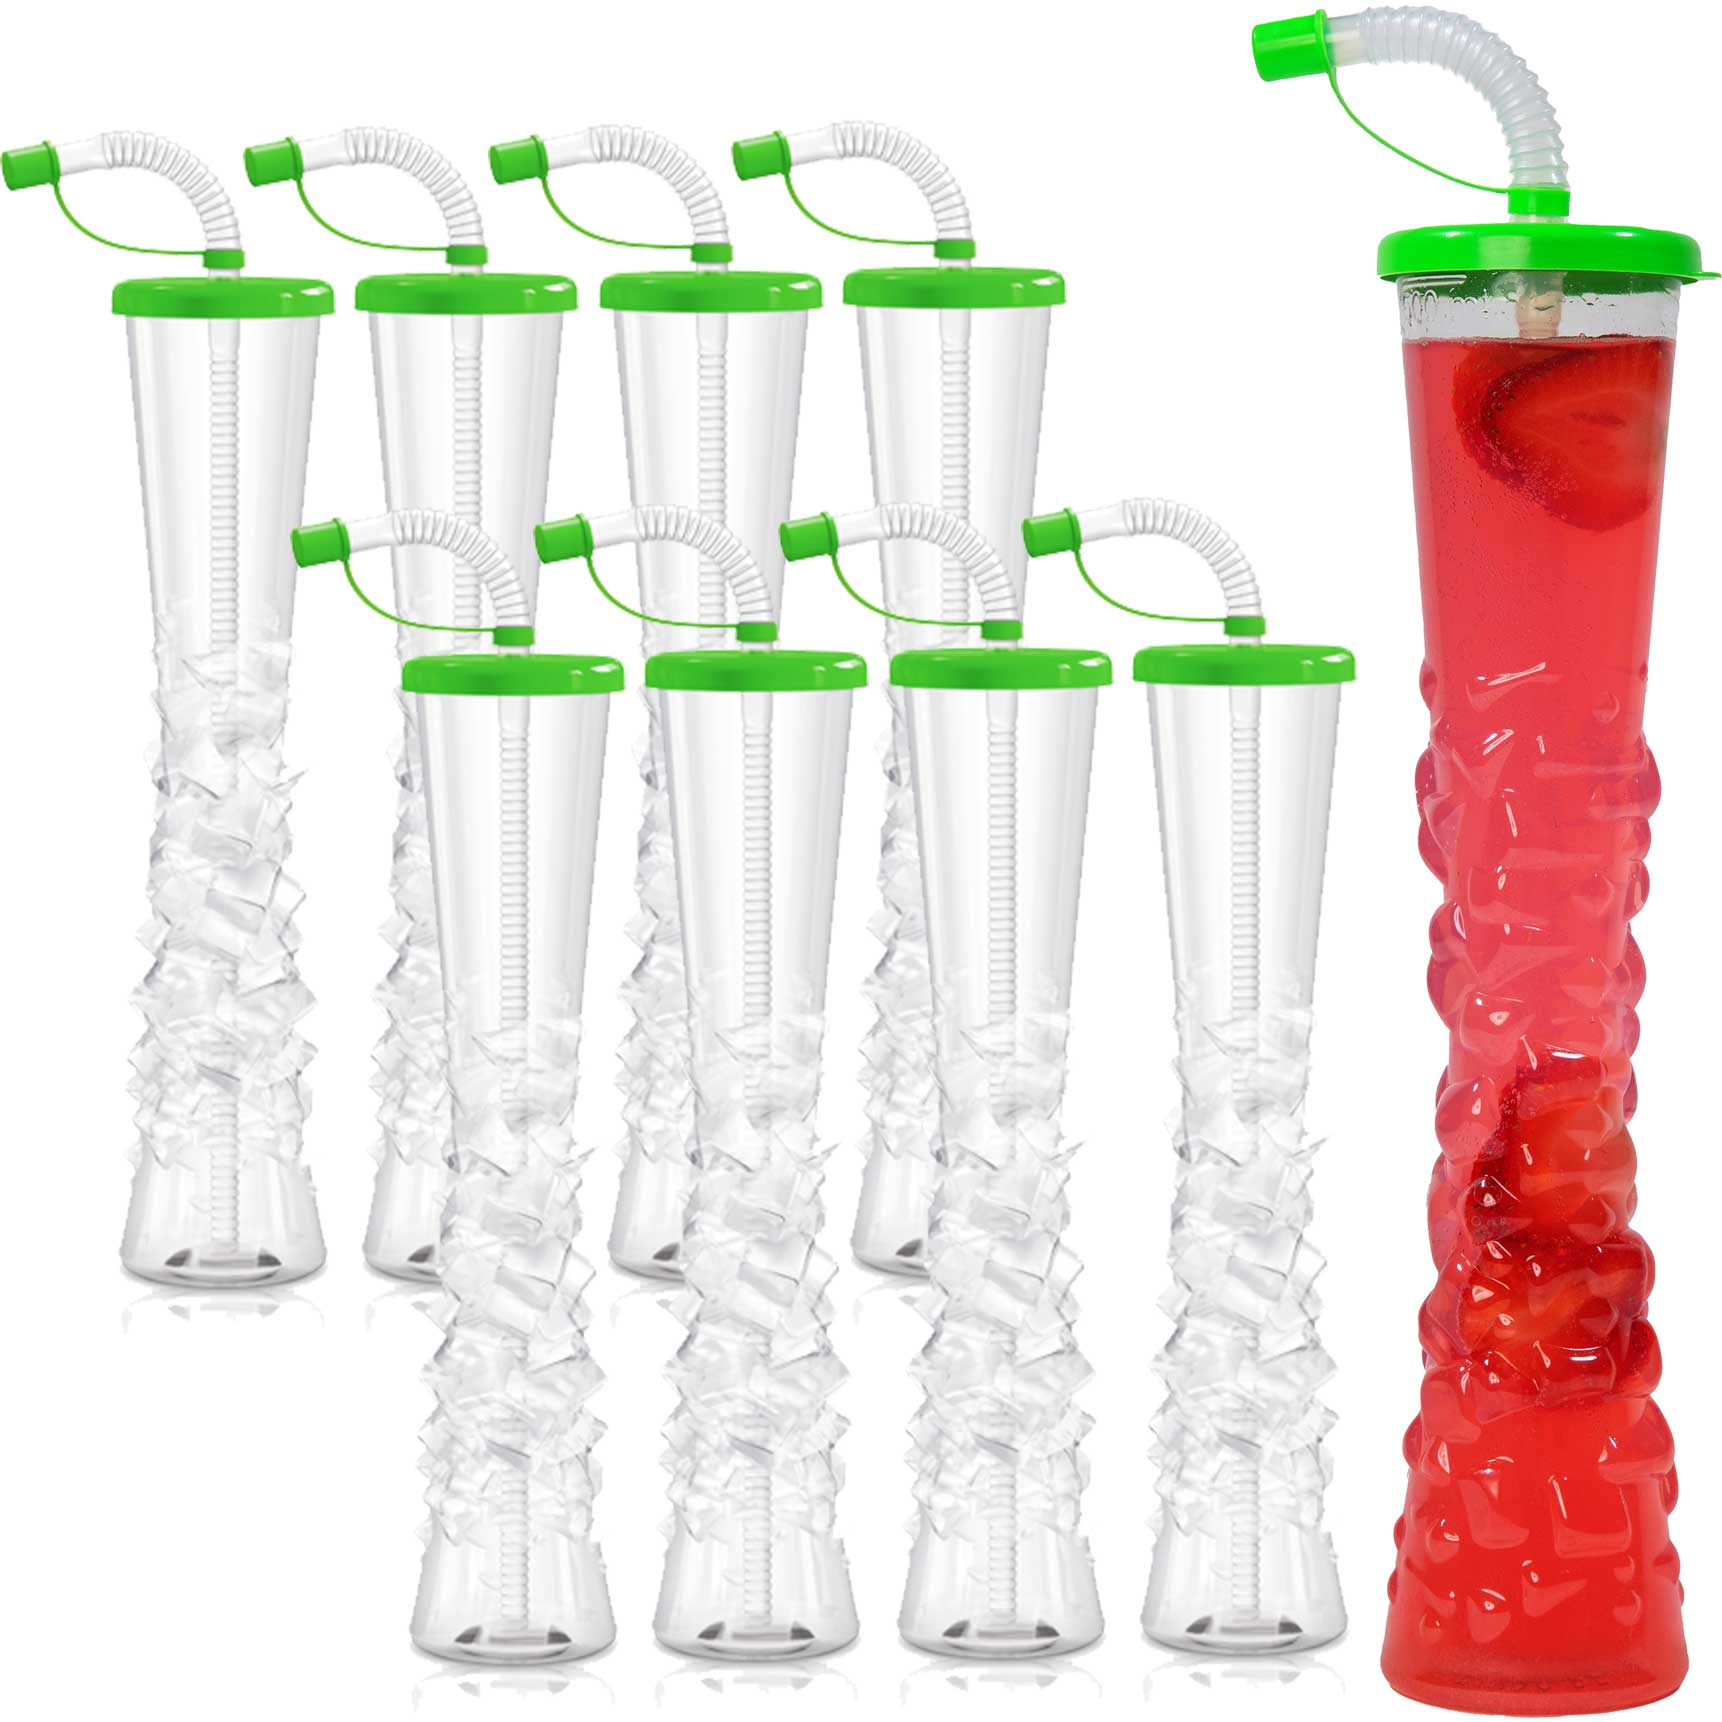 http://noveltycupsusa.com/cdn/shop/files/sweet-world-usa-yard-cups-ice-yard-cups-54-cups-lime-for-margaritas-and-frozen-drinks-kids-parties-17oz-500ml-sw-57353-cups-with-lids-and-straws-35524054057119.jpg?v=1684776046